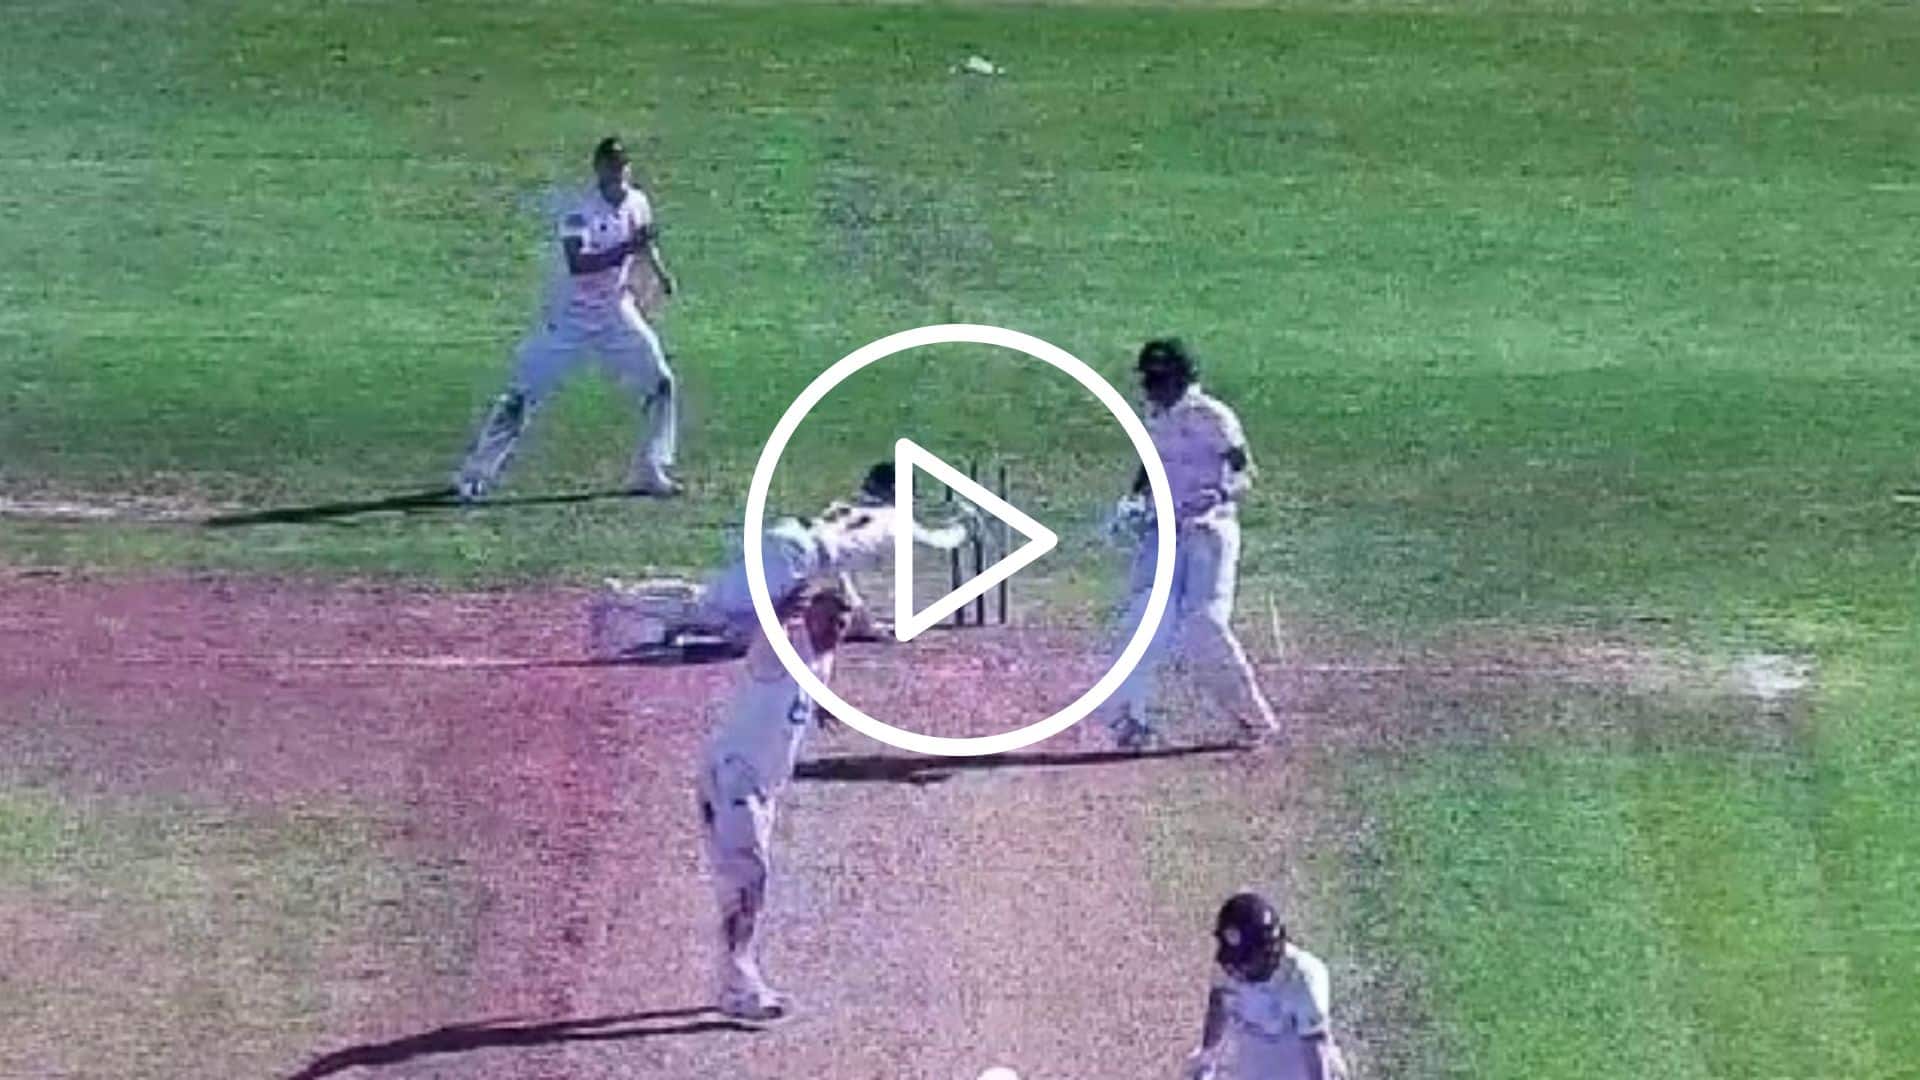 [Watch] Haider Ali's 'Brainfade' Moment Results in Bizarre Dismissal in County Championship